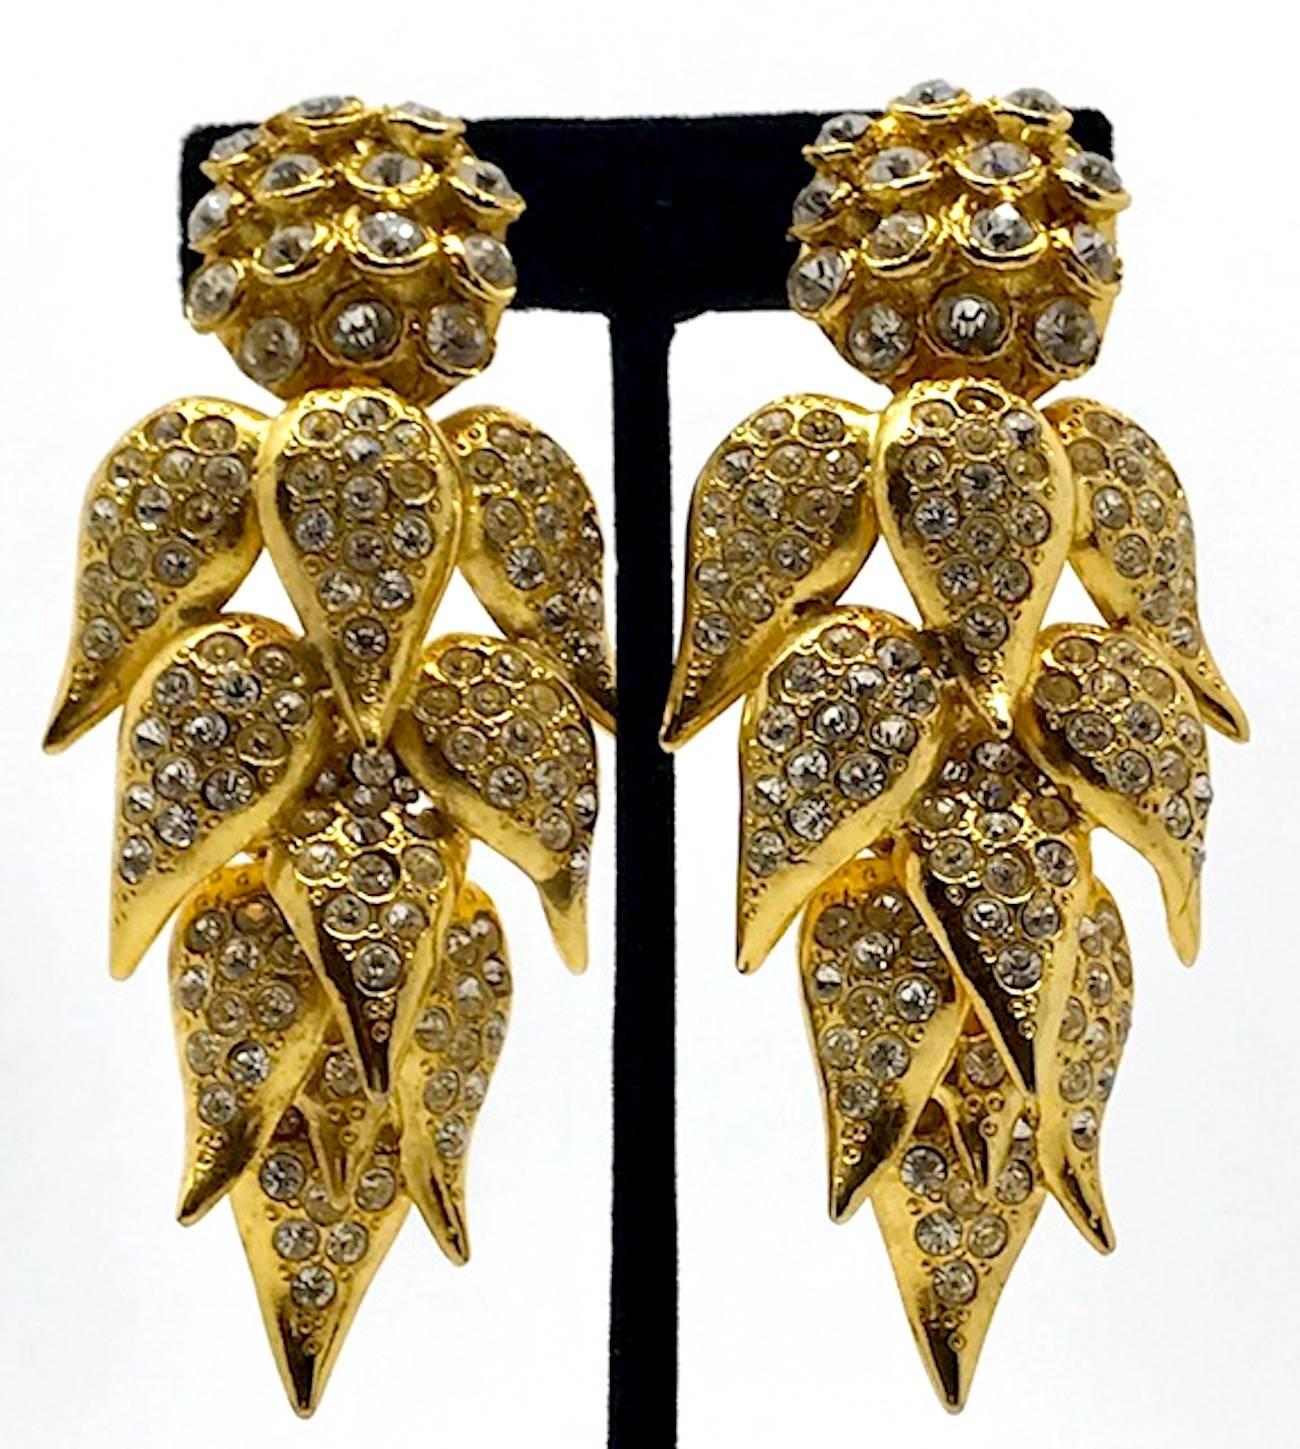 Contemporary De Liguoro large earrings from Actress Elsa Martinelli's personal collection